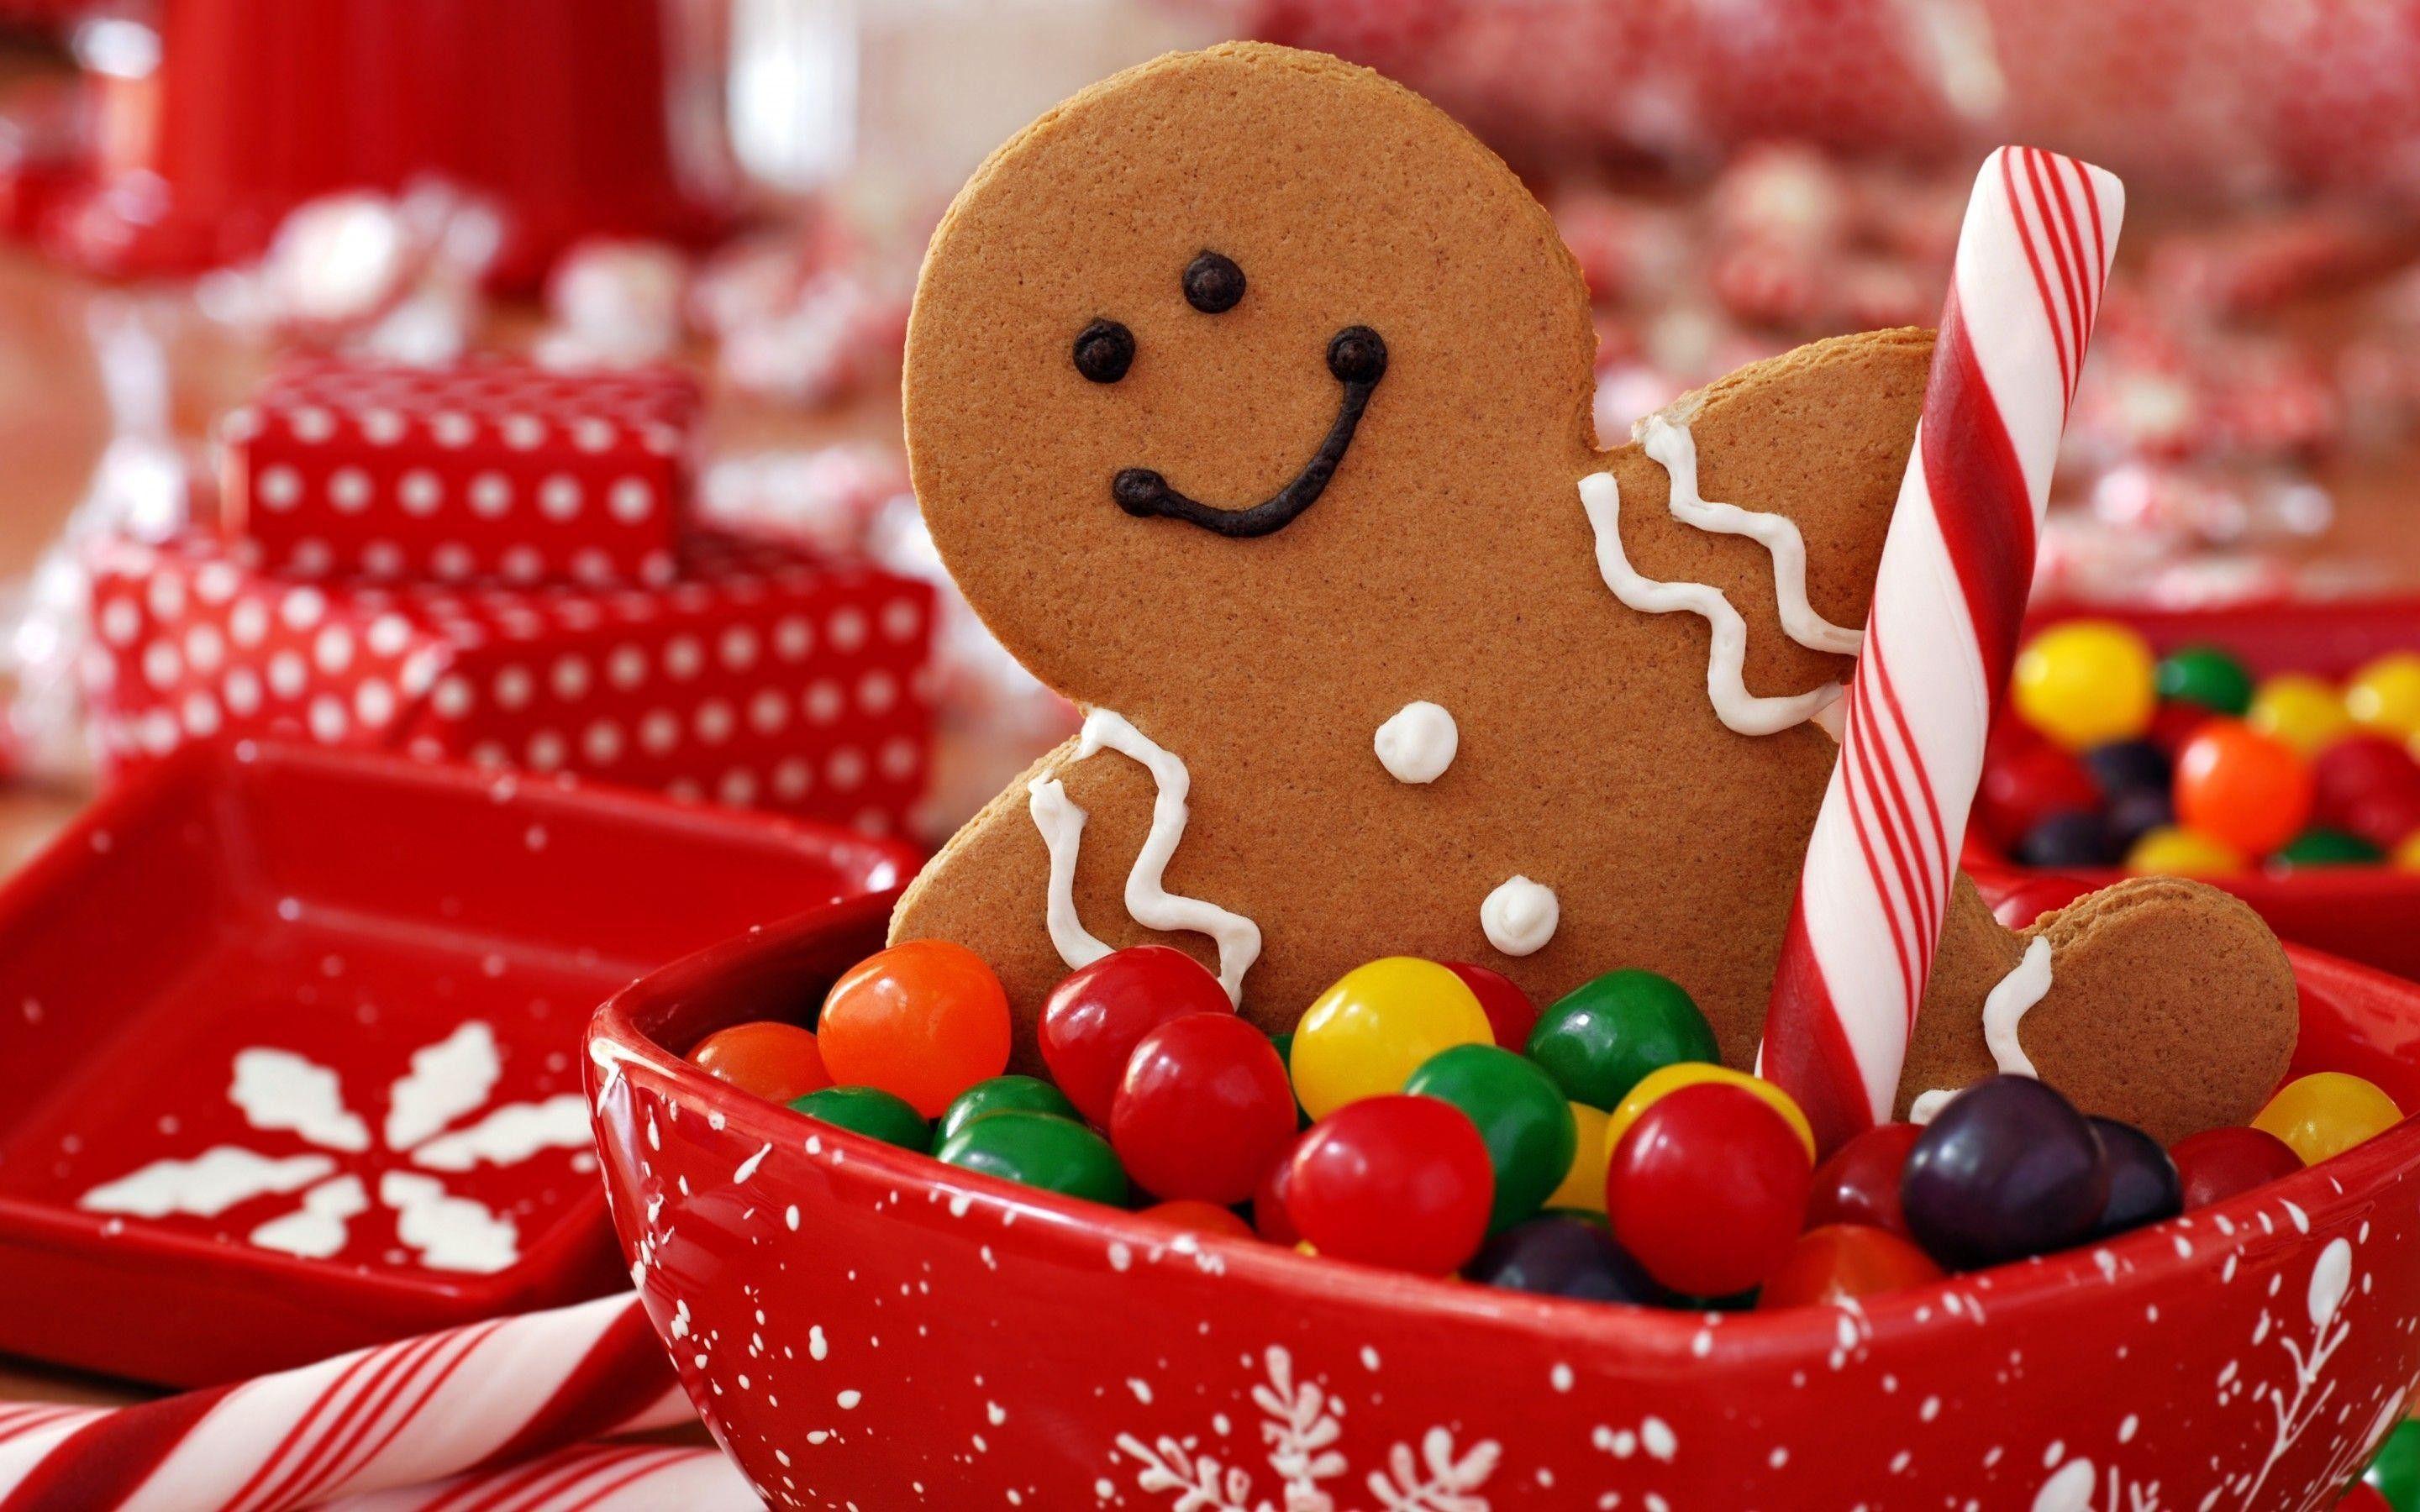 Gingerbread Photos Download The BEST Free Gingerbread Stock Photos  HD  Images